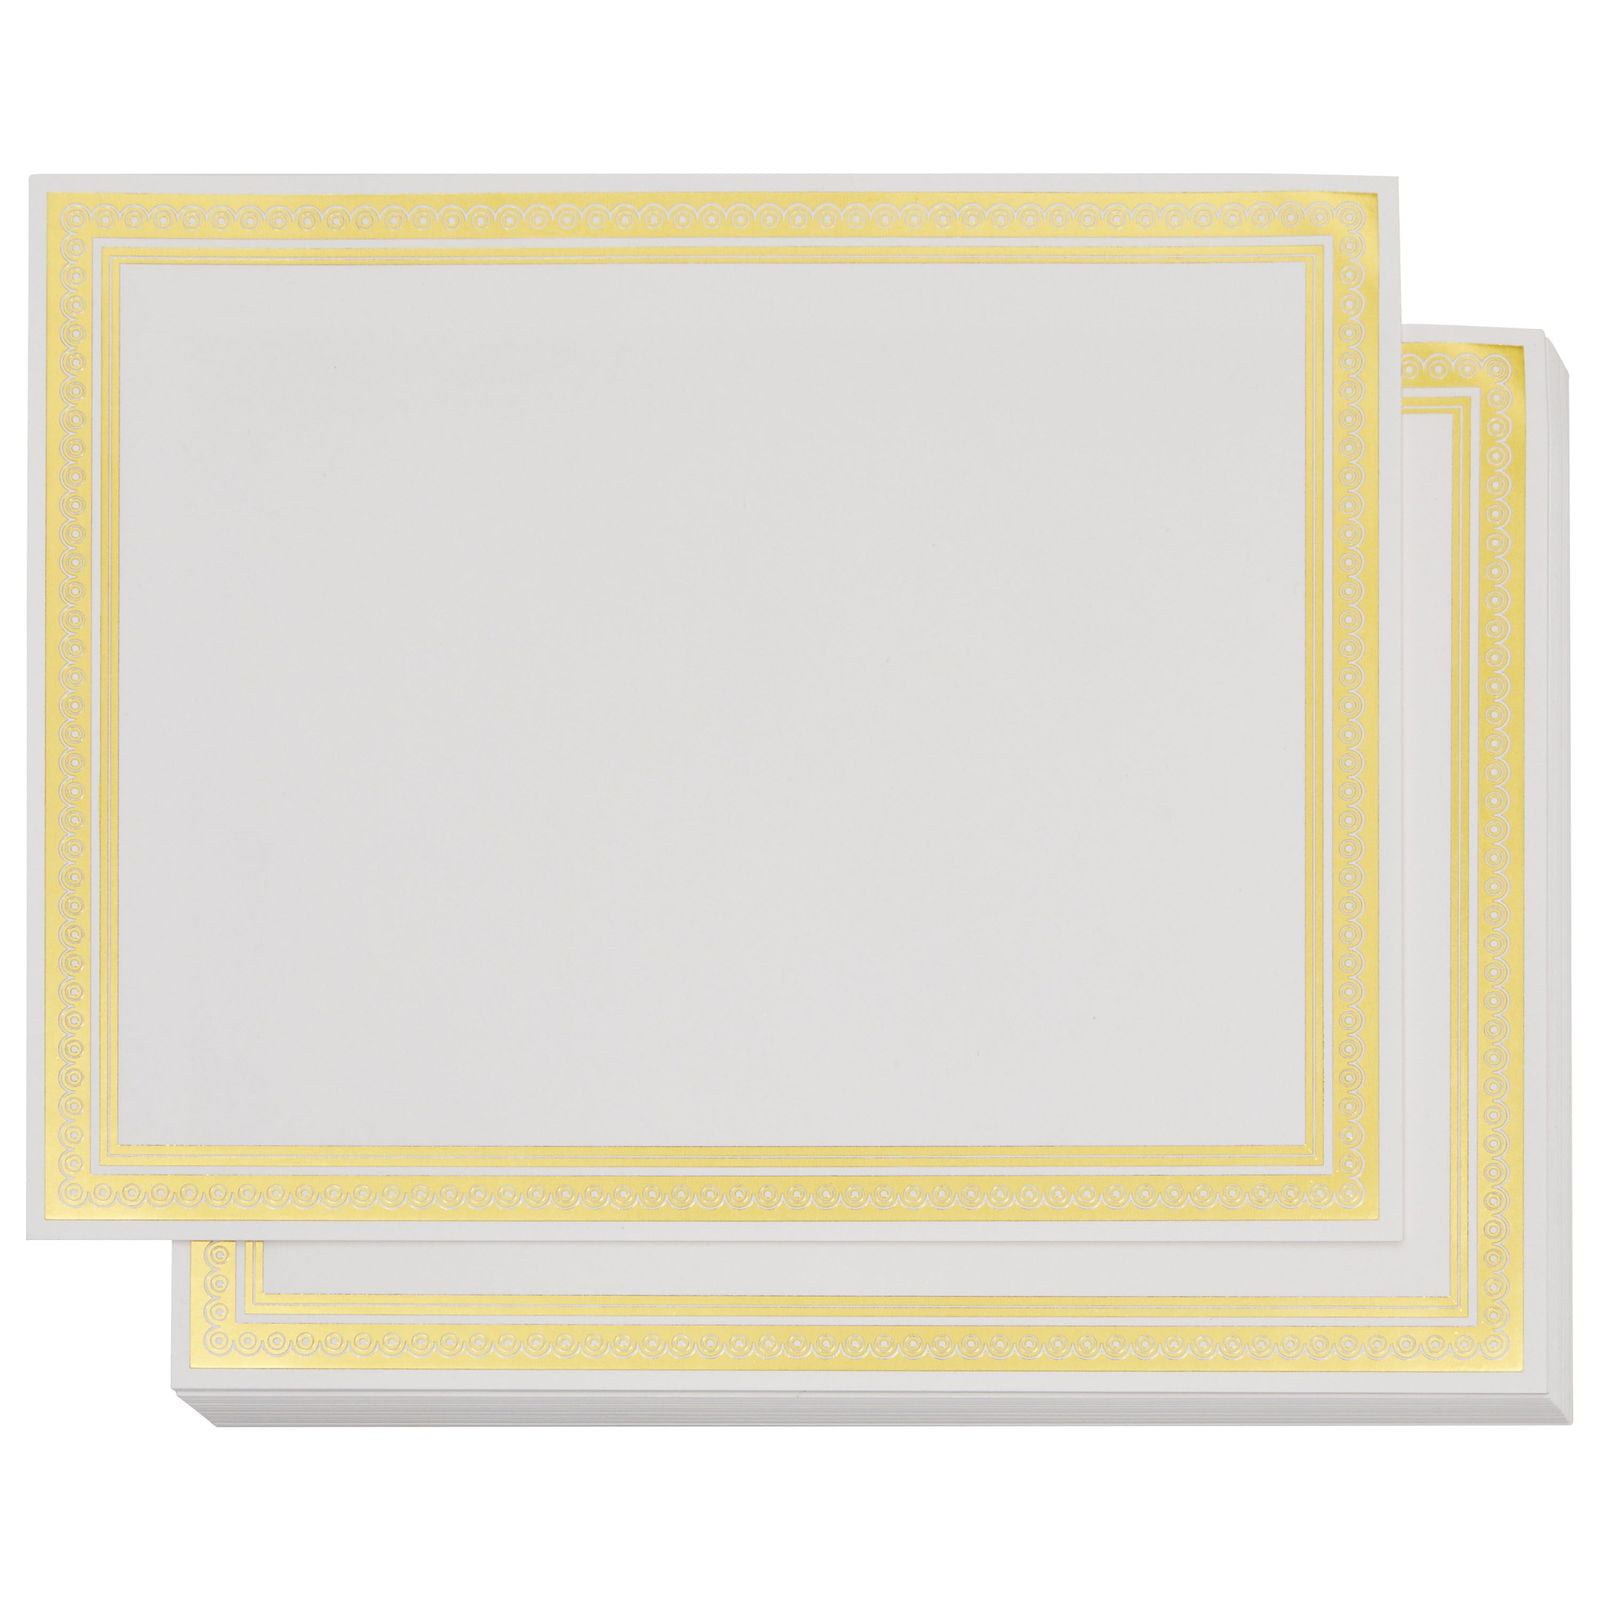 Pk of 100 CERTIFICATE BORDER-PAPER Make Your Own Certificates! 